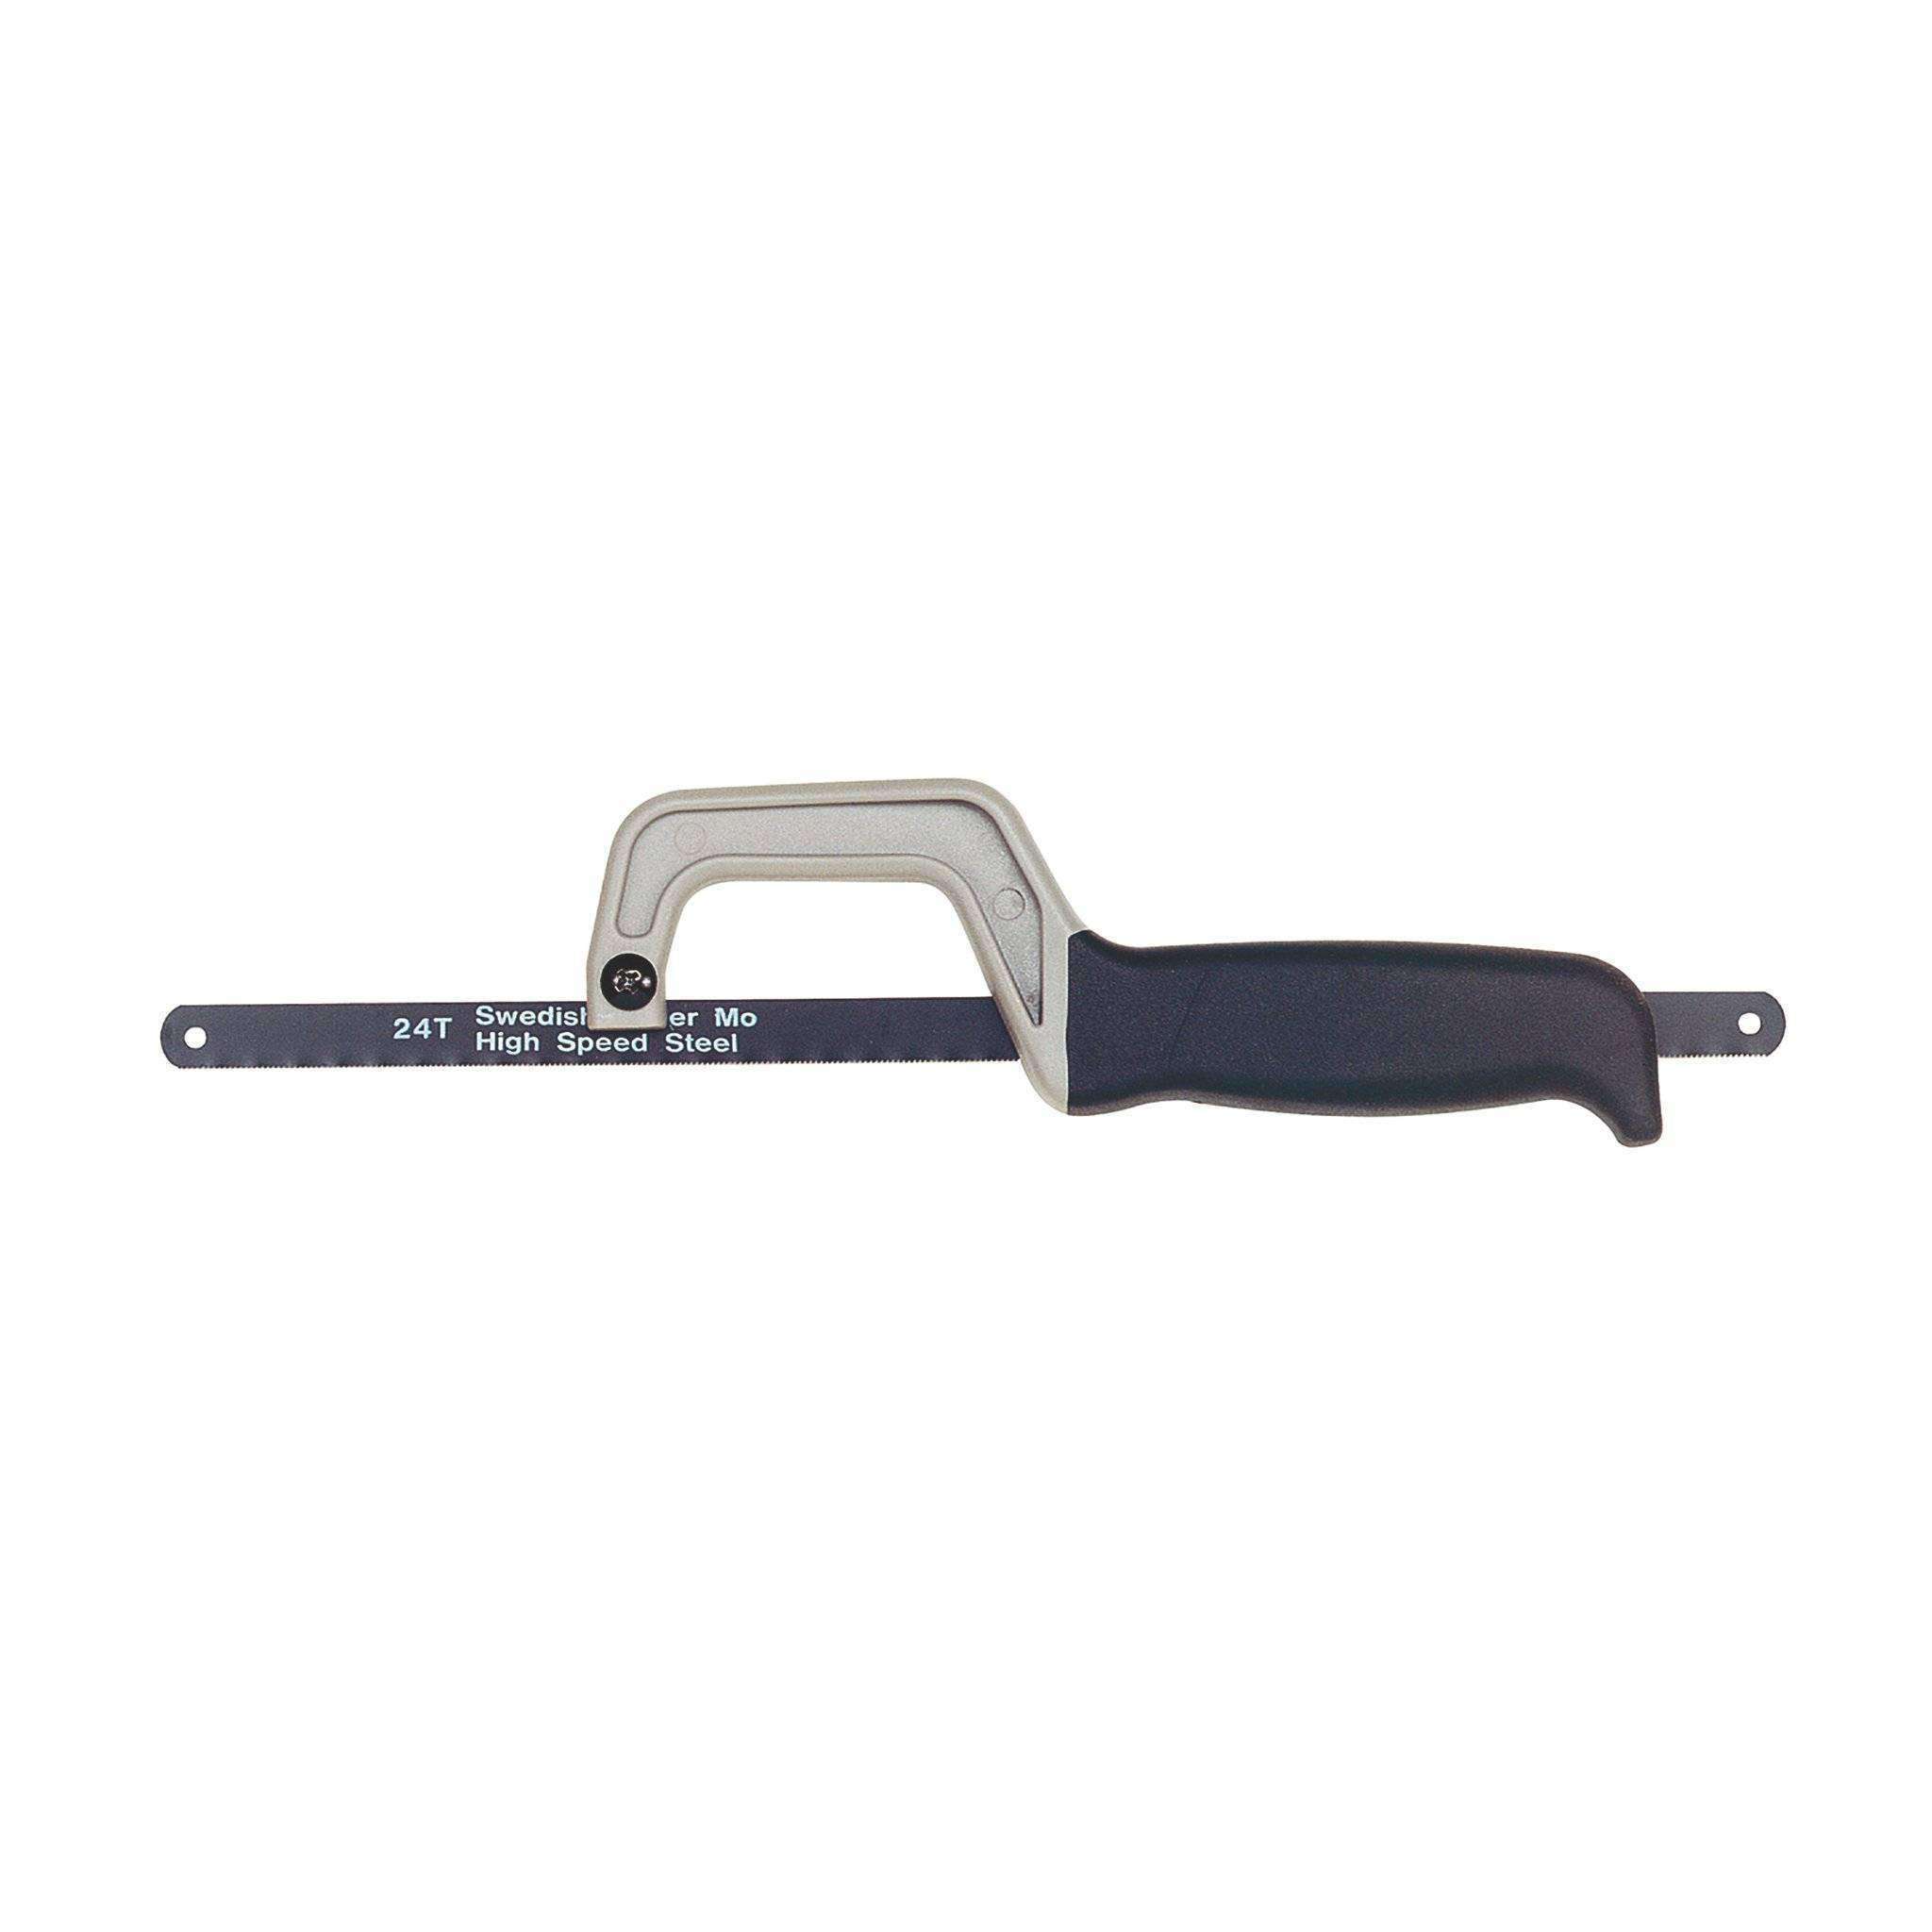 Teng Tools Hacksaw Holder With 12 Inch Blade and Key Hole Saw - 704